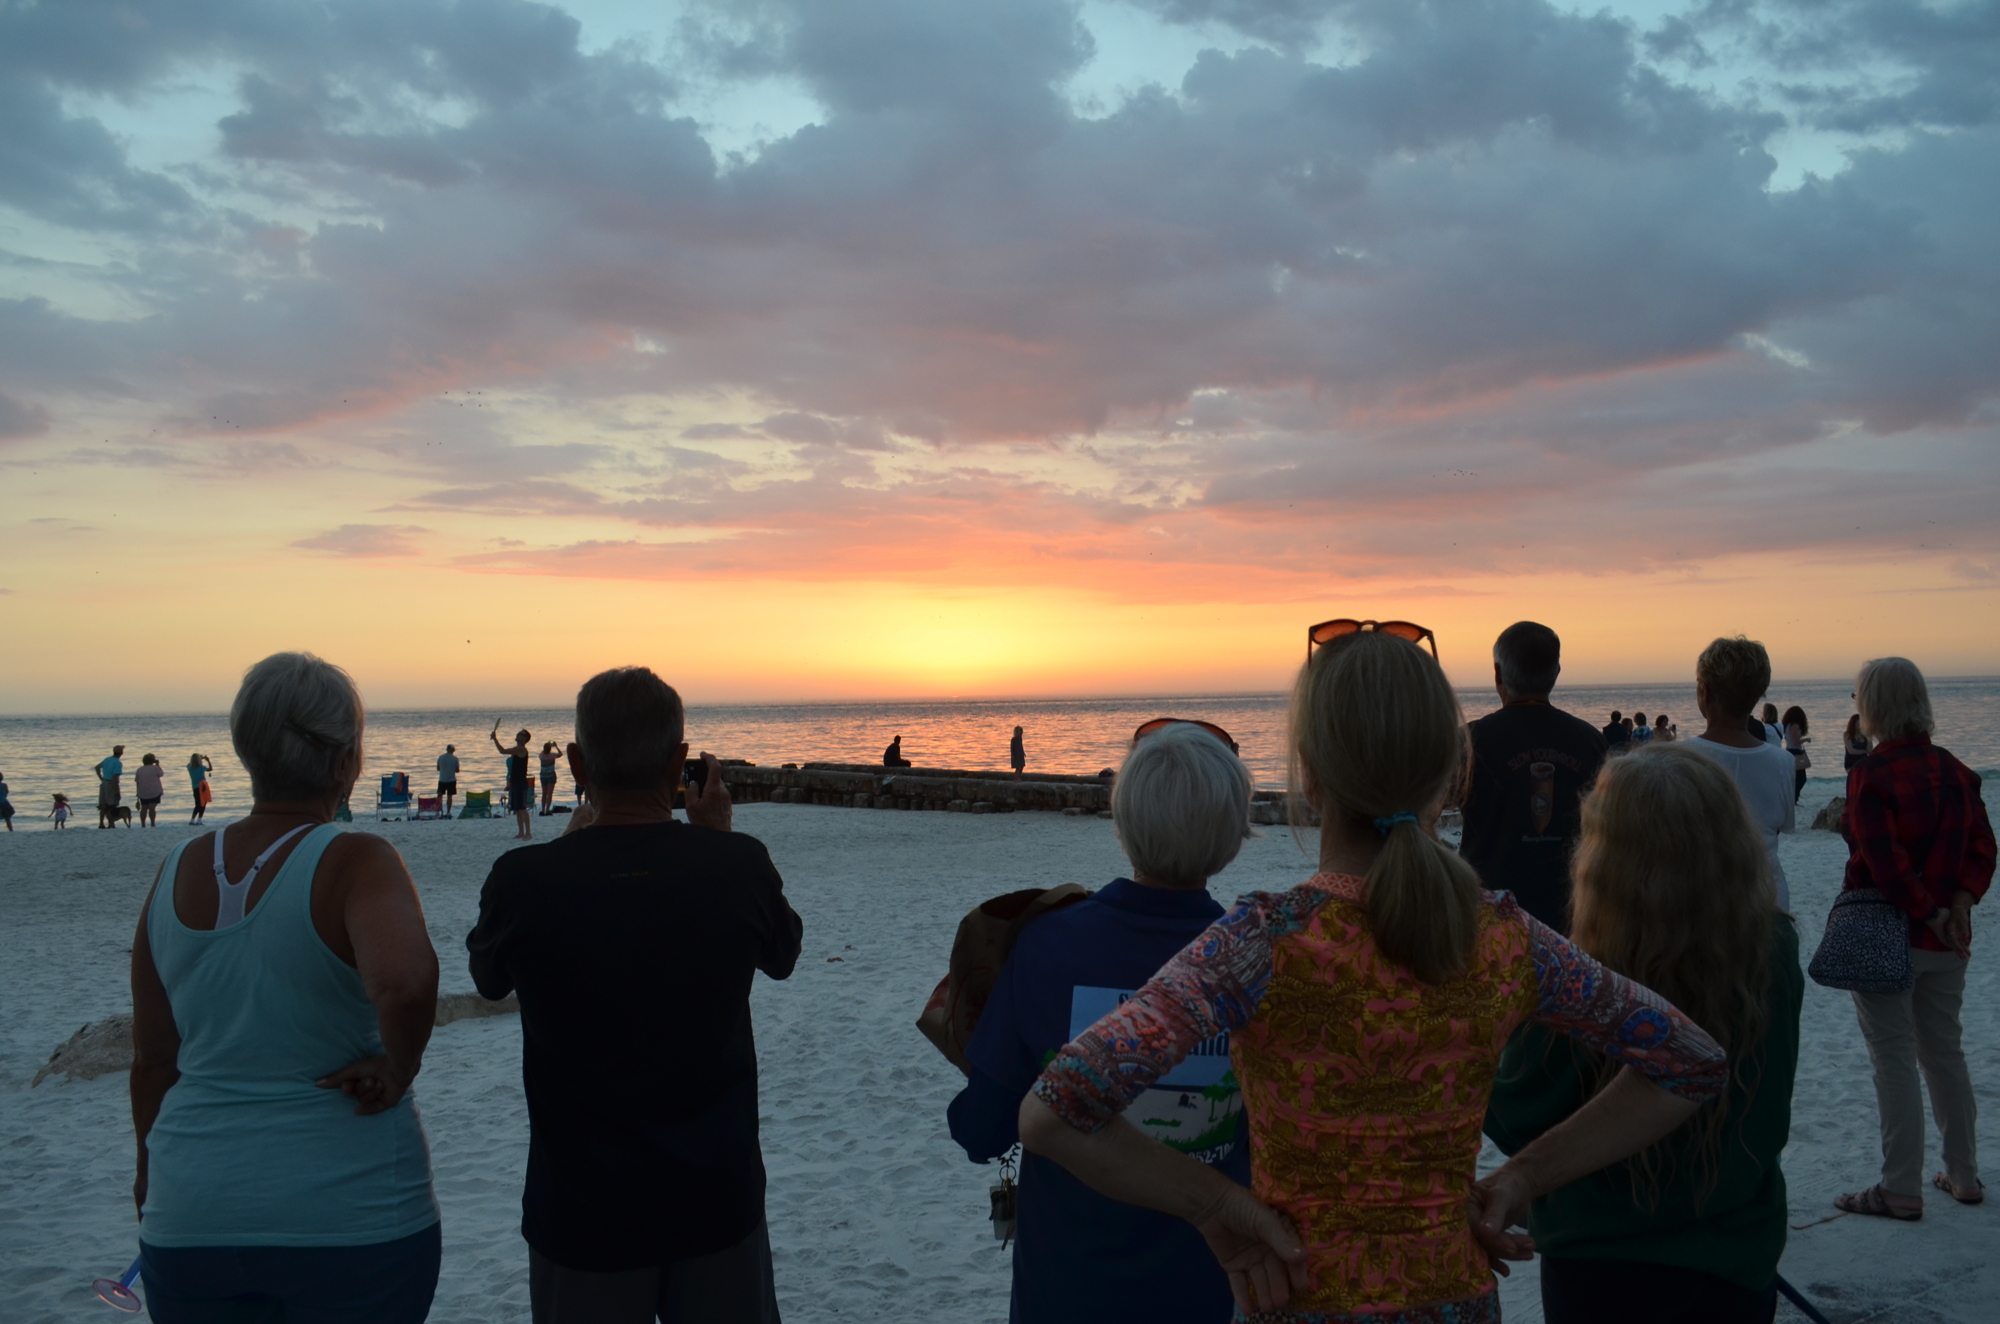 Visitors to Siesta Key Beach take in the sunset at Beach Access 2. Even among those off-put by the increased tourism, Siesta’s natural beauty remains alluring.